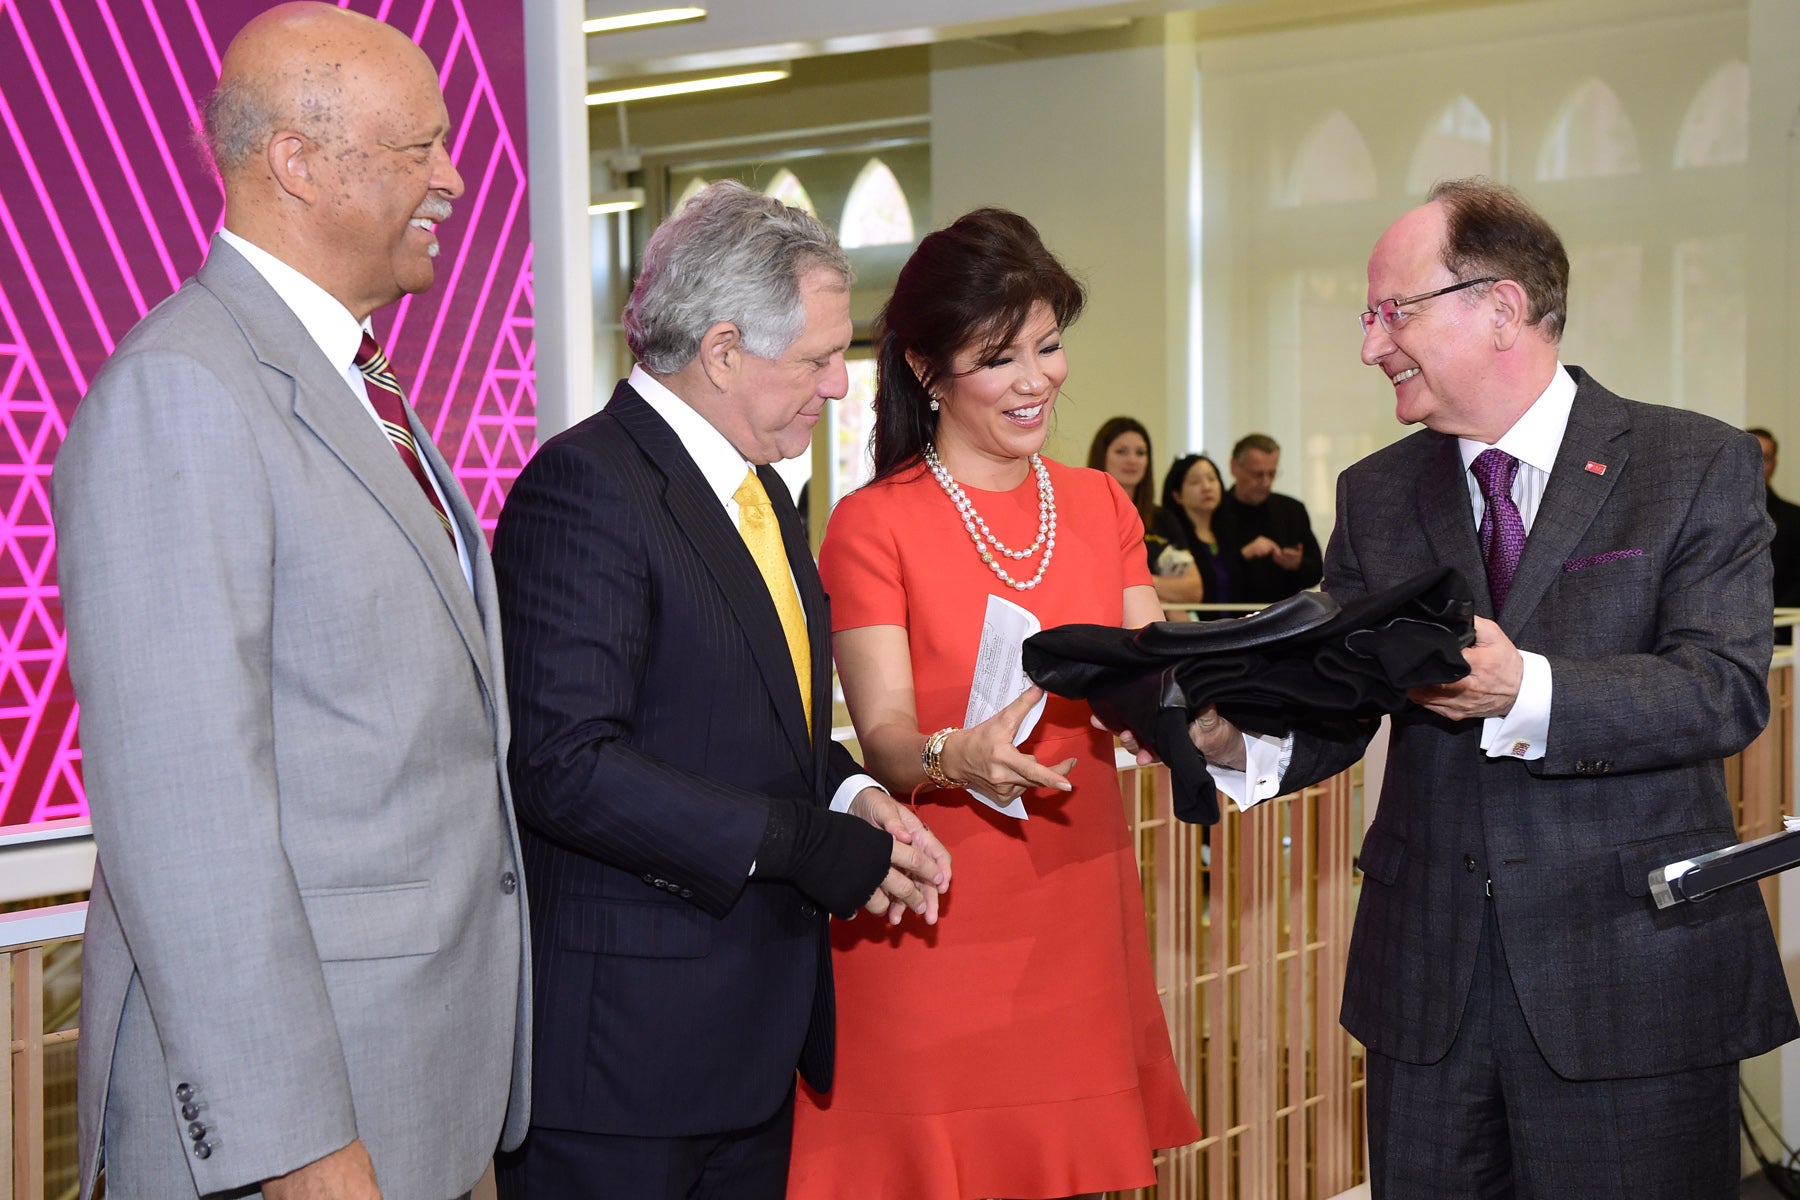 USC Annenberg School for Communication and Journalism naming event for the Julie Chen/Leslie Moonves